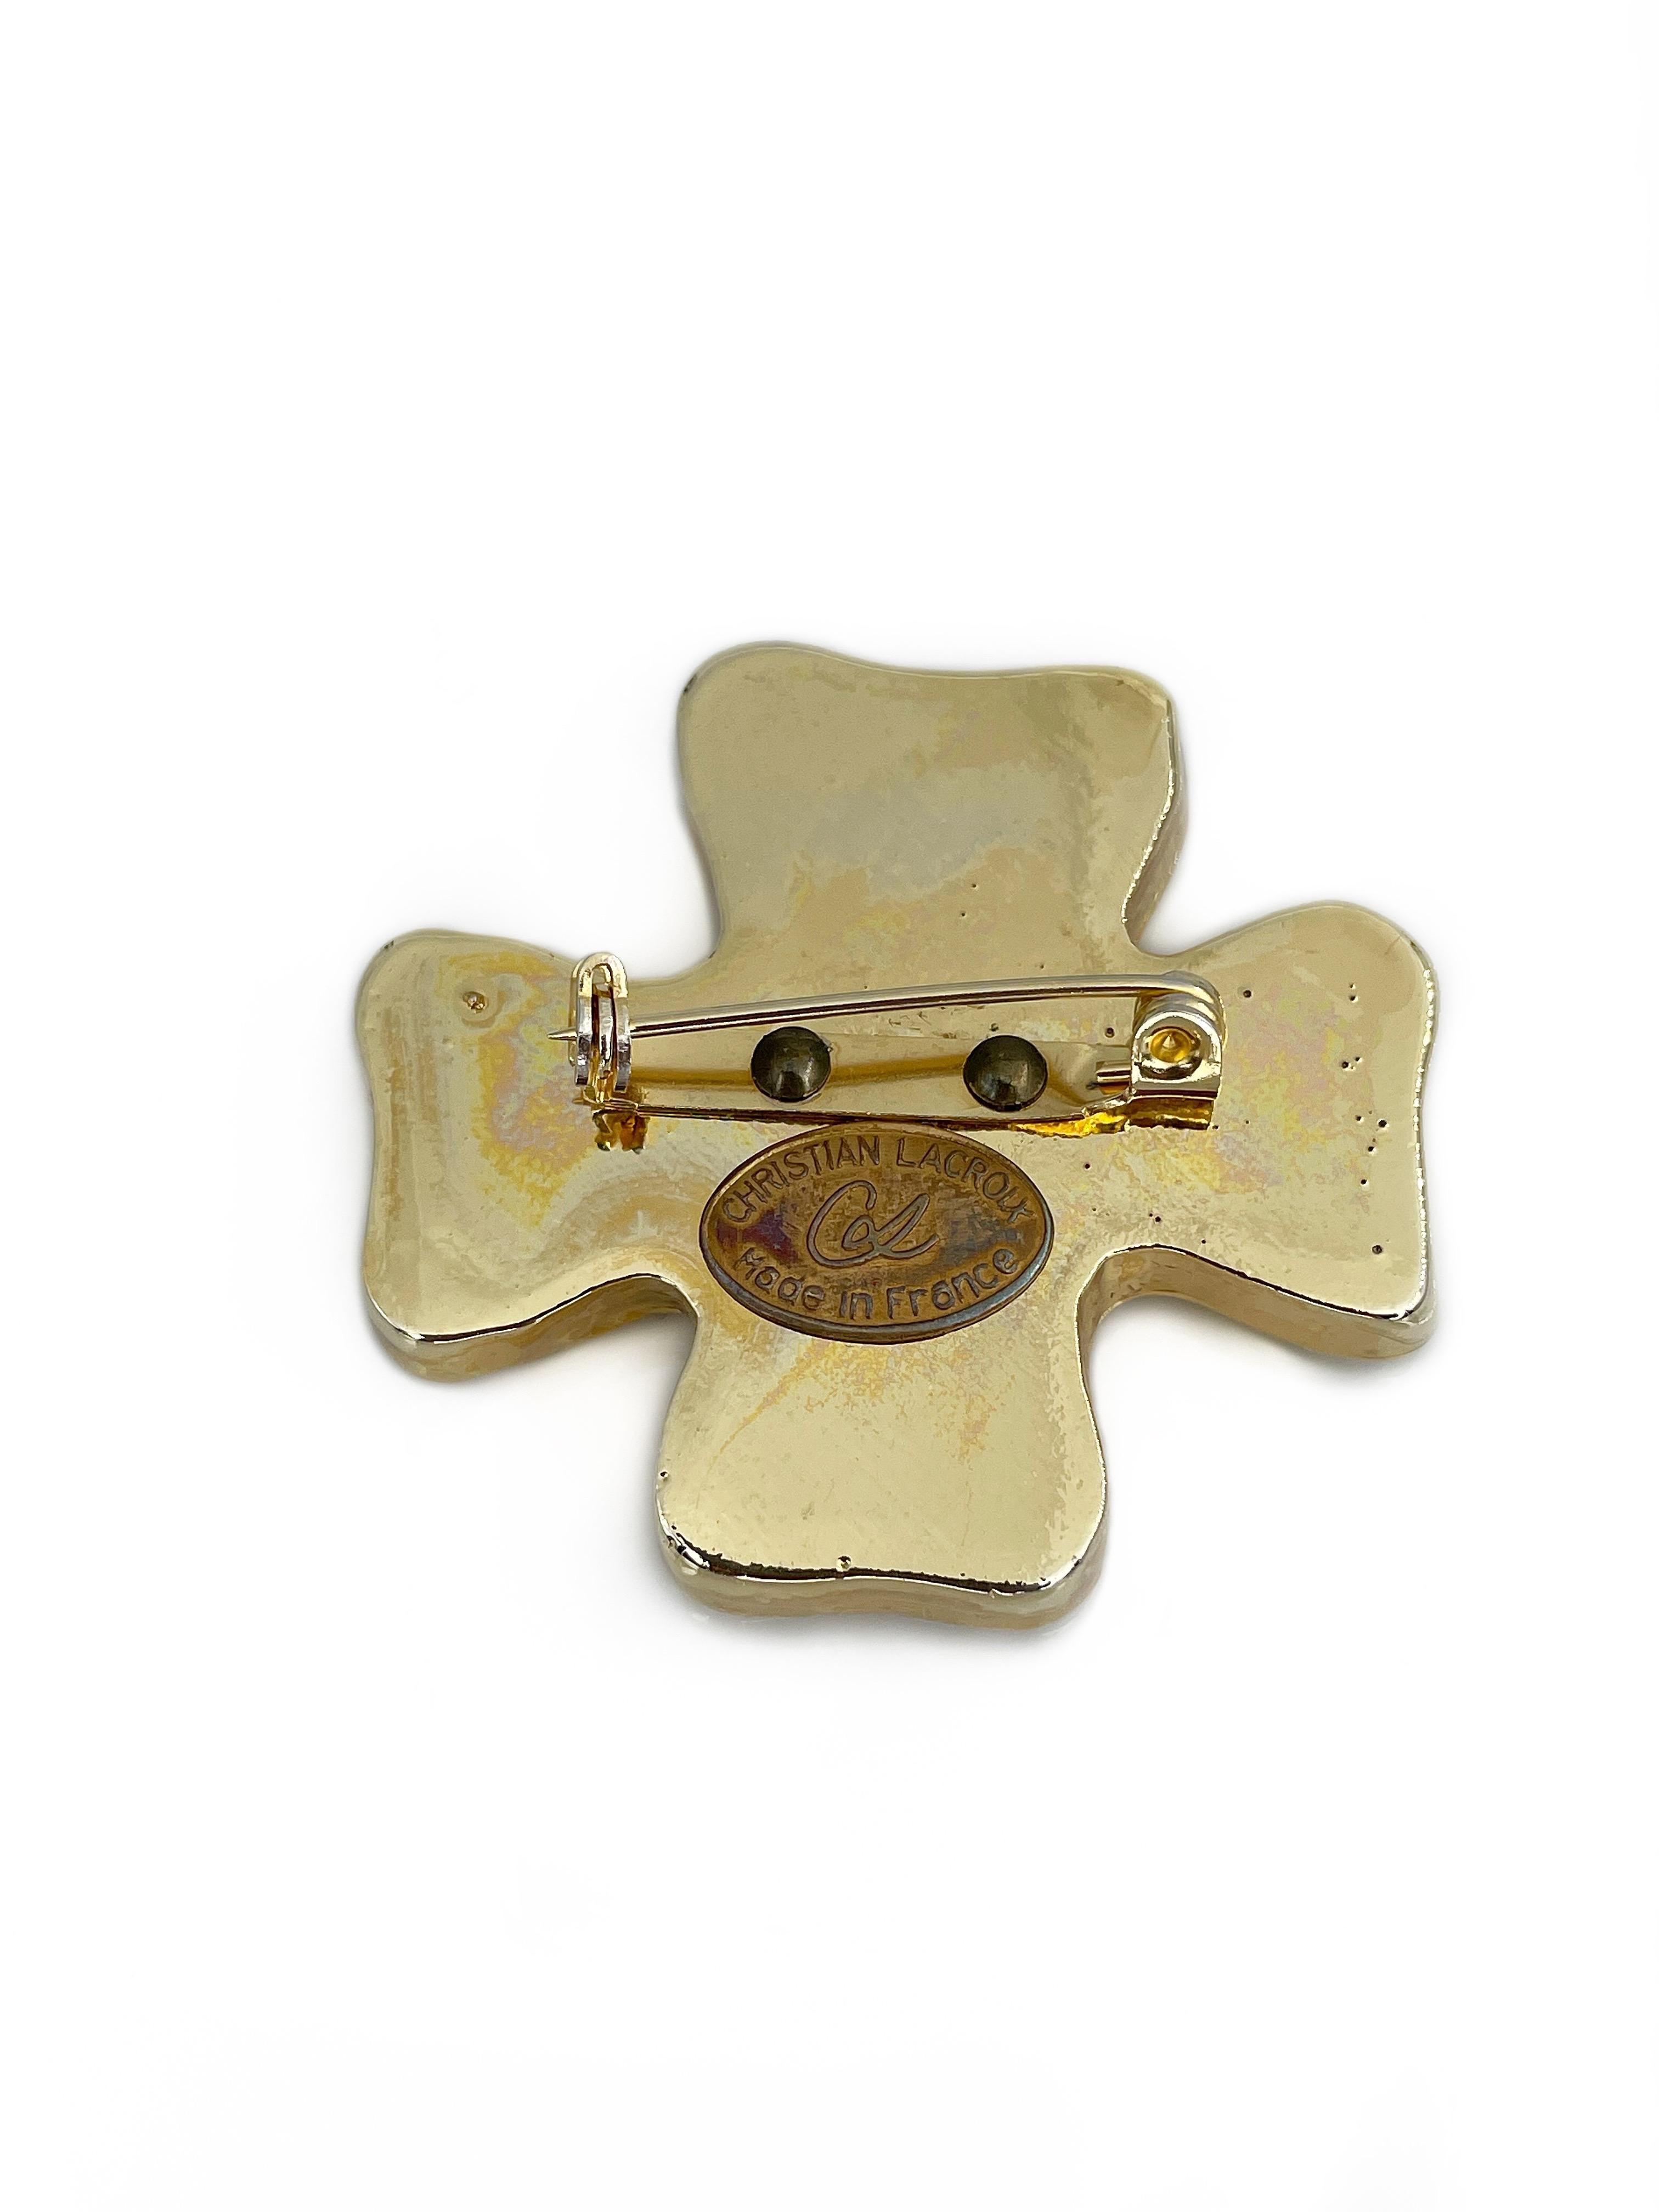 1980s Vintage Christian Lacroix Gold Tone Cross Design Pin Brooch 1